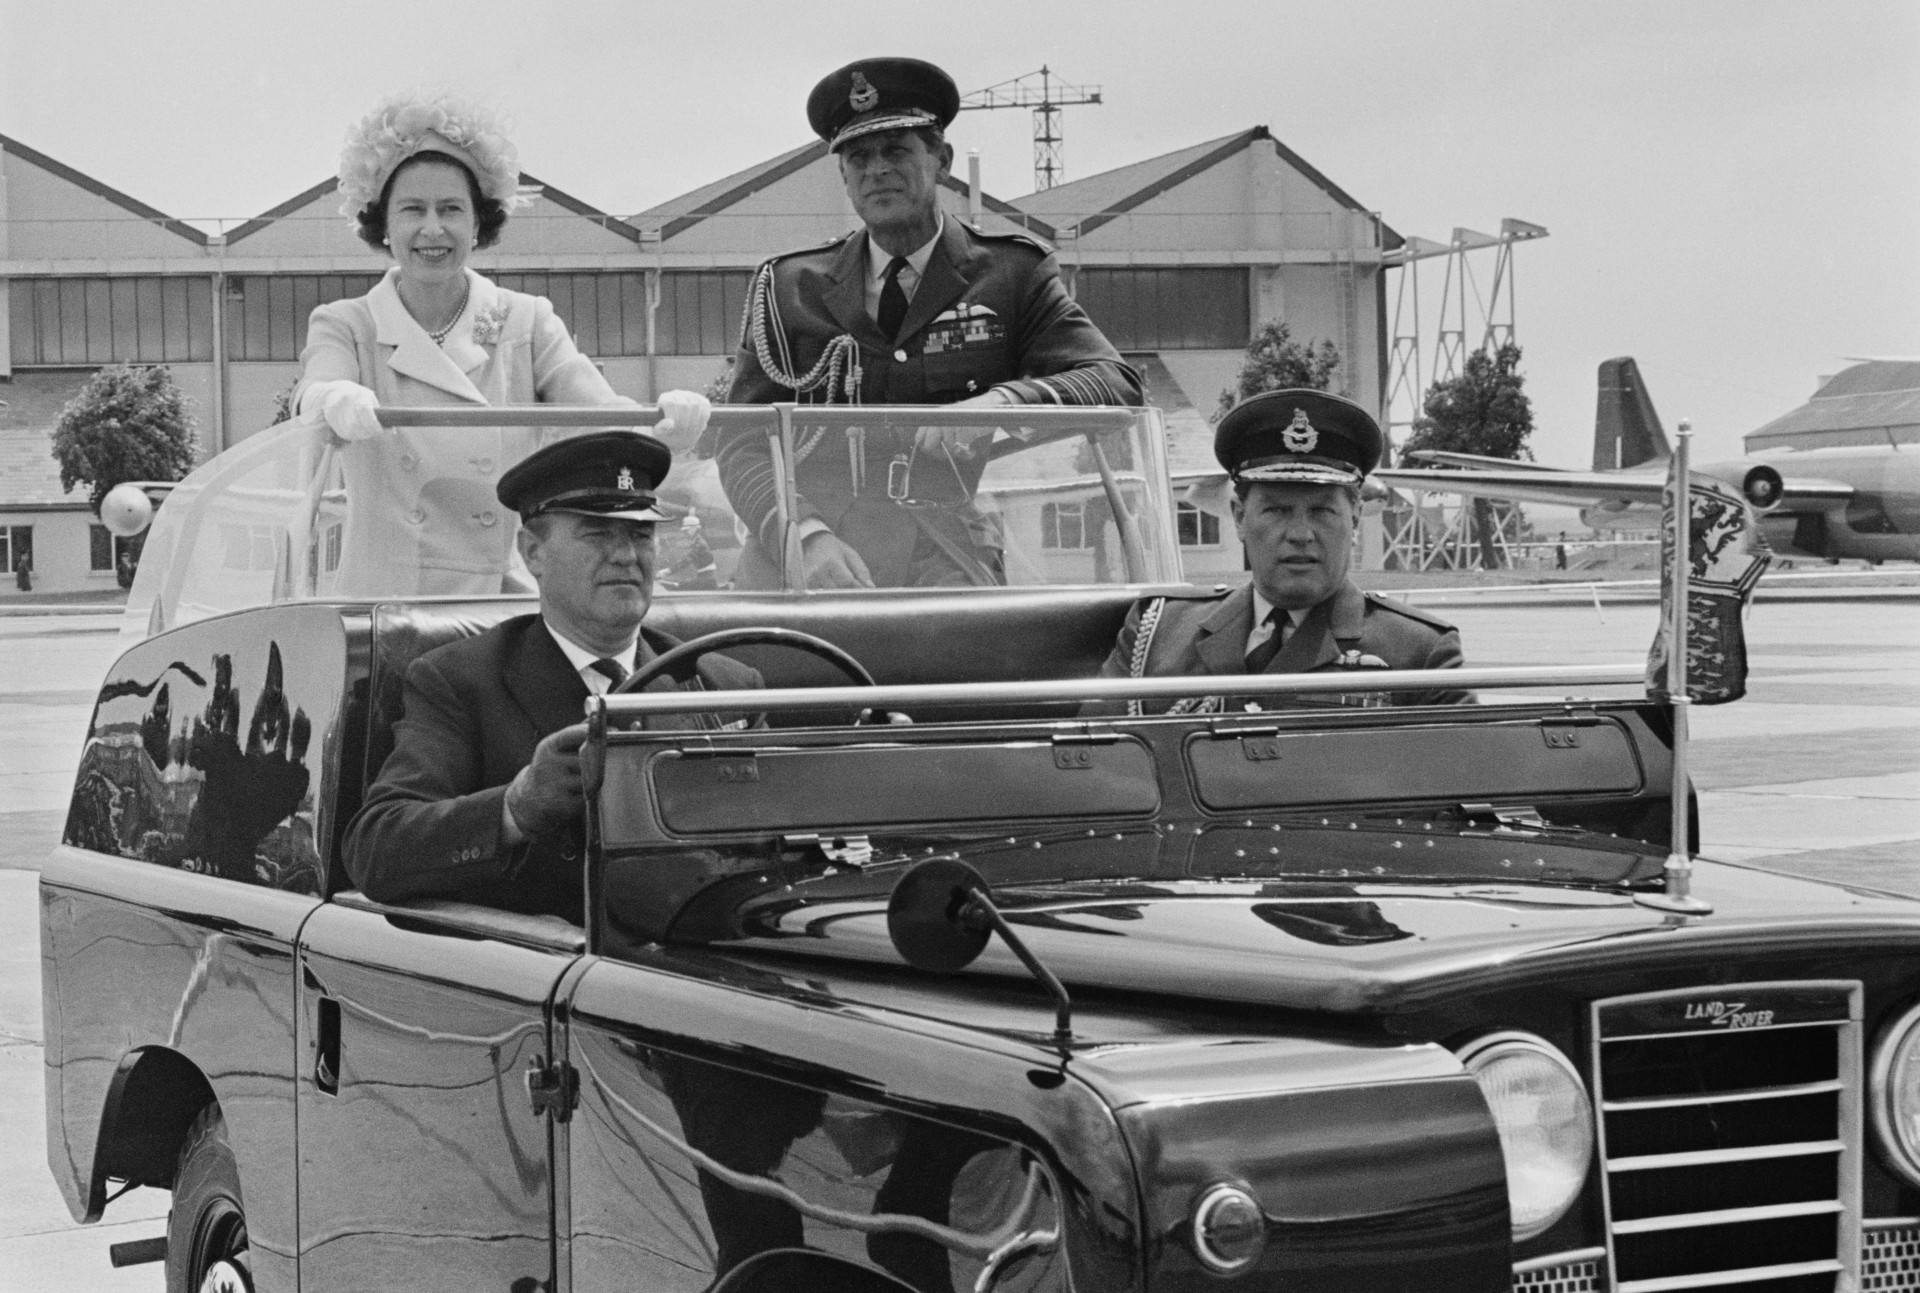 Queen Elizabeth II and Prince Philip arrive at Abingdon to celebrate 50 years of the Royal Air Force.<p><a href="https://www.msn.com/en-za/community/channel/vid-7xx8mnucu55yw63we9va2gwr7uihbxwc68fxqp25x6tg4ftibpra?cvid=94631541bc0f4f89bfd59158d696ad7e">Follow us and access great exclusive content every day</a></p>